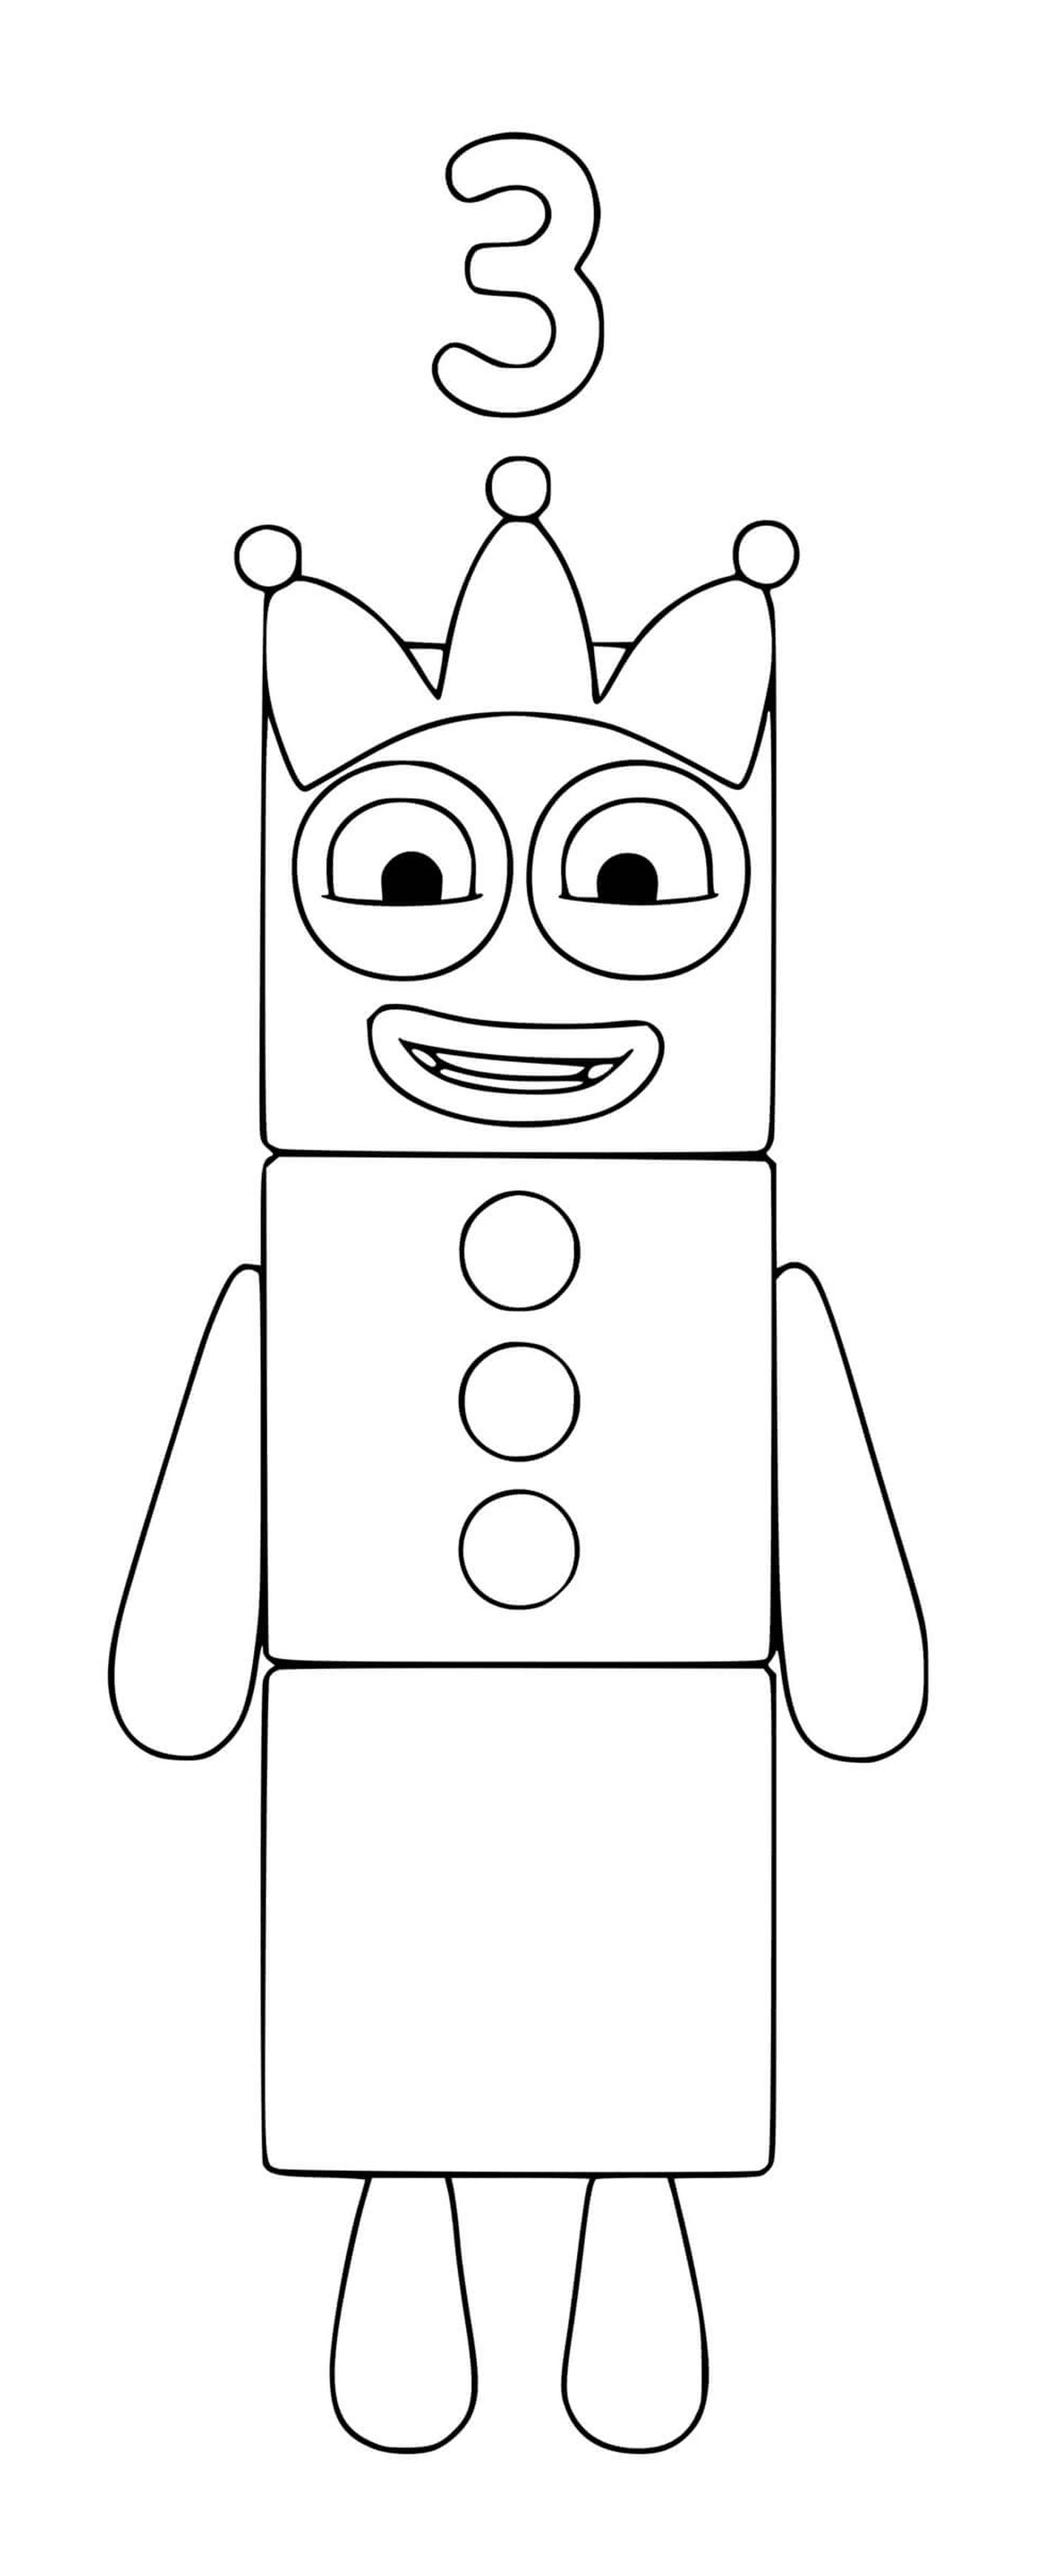  Numberblocks number 3, a toy robot 